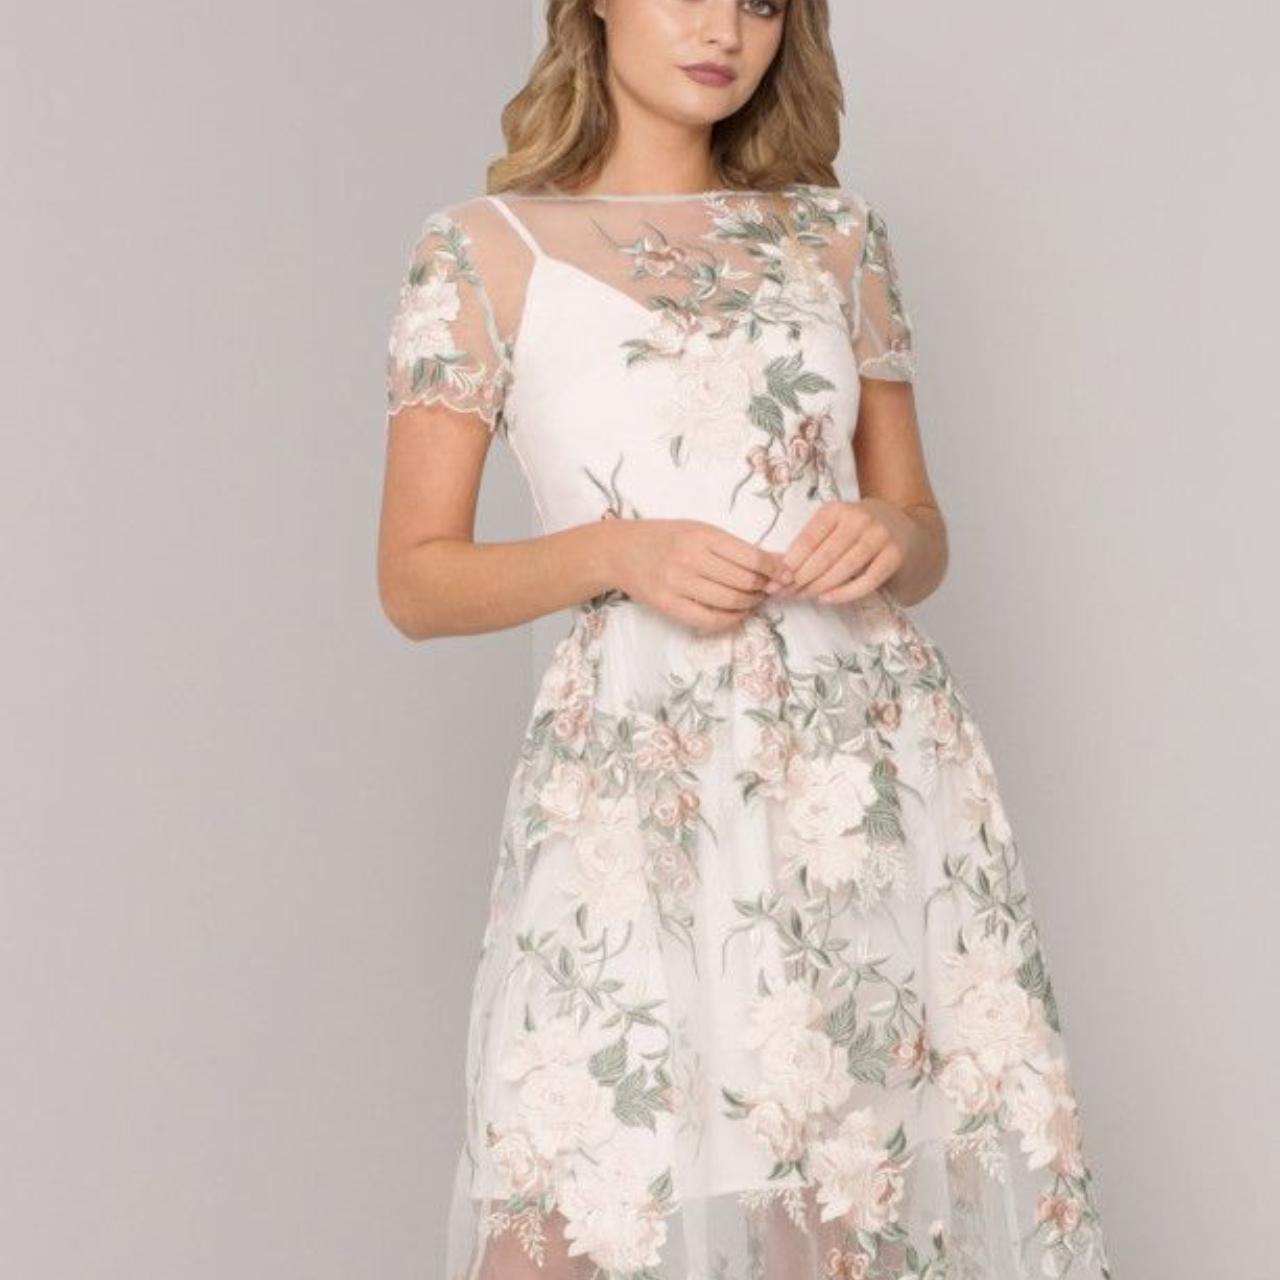 Floral Embroidered Mesh Overlay Midi Dress In Nude – Chi, 60% OFF